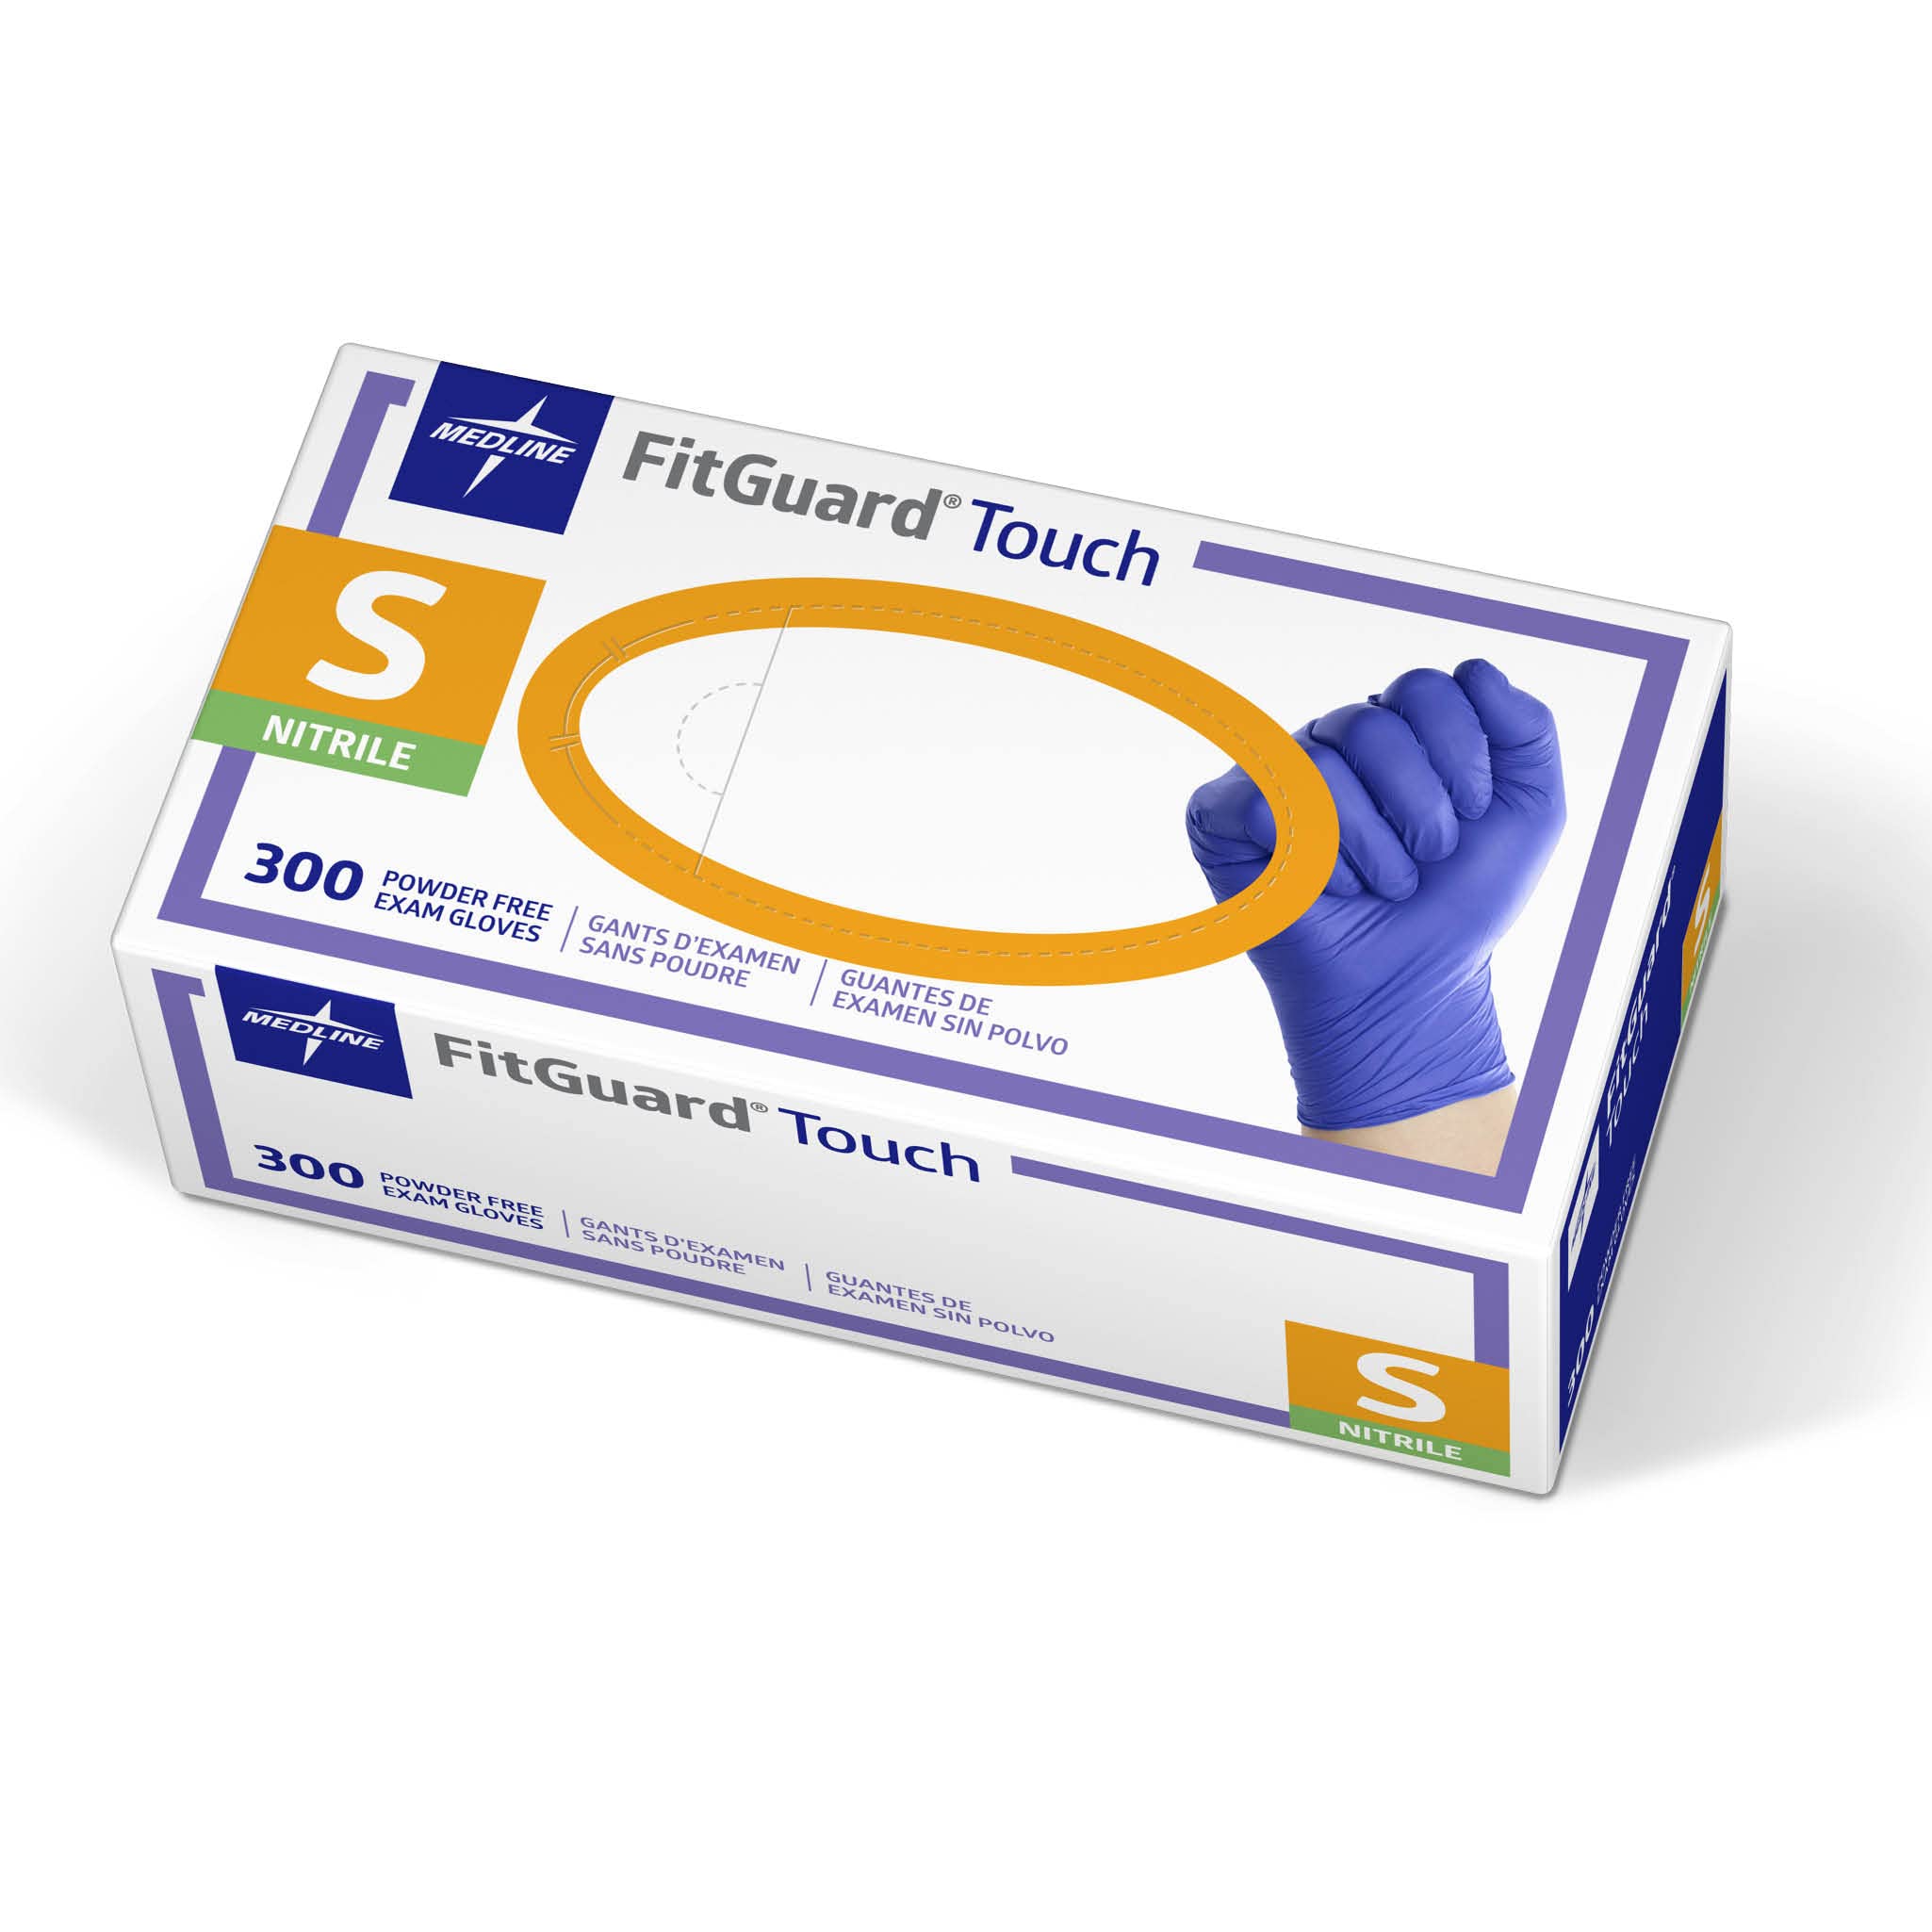 Medline FitGuard Touch Nitrile Exam Gloves - Sensitivity With Textured Fingertips- Small, 300/Box